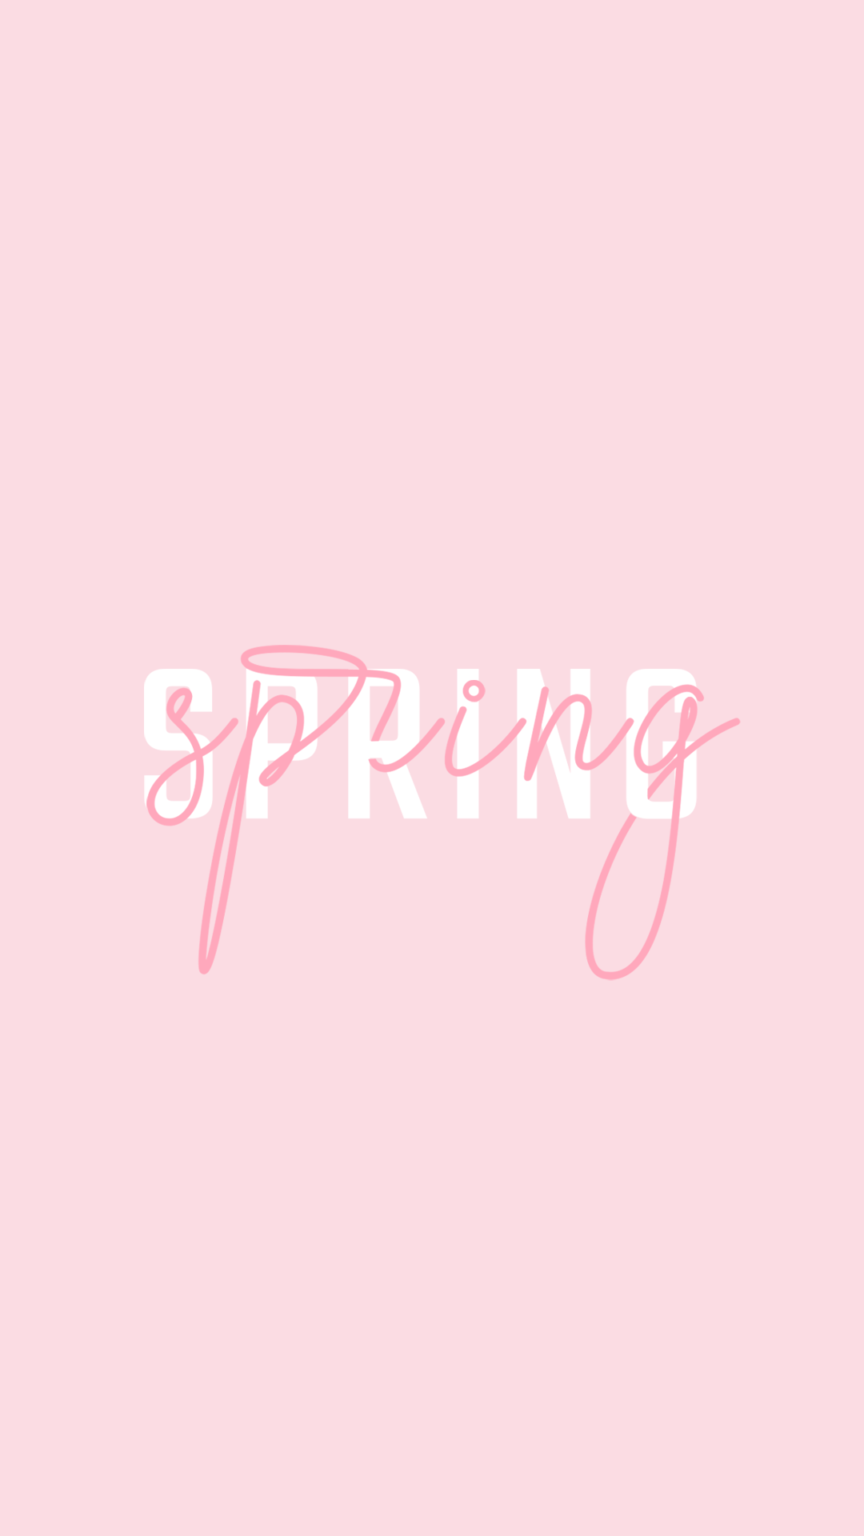 Spring is coming! The cutest images to post on social media 🌷 ⋆ The ...